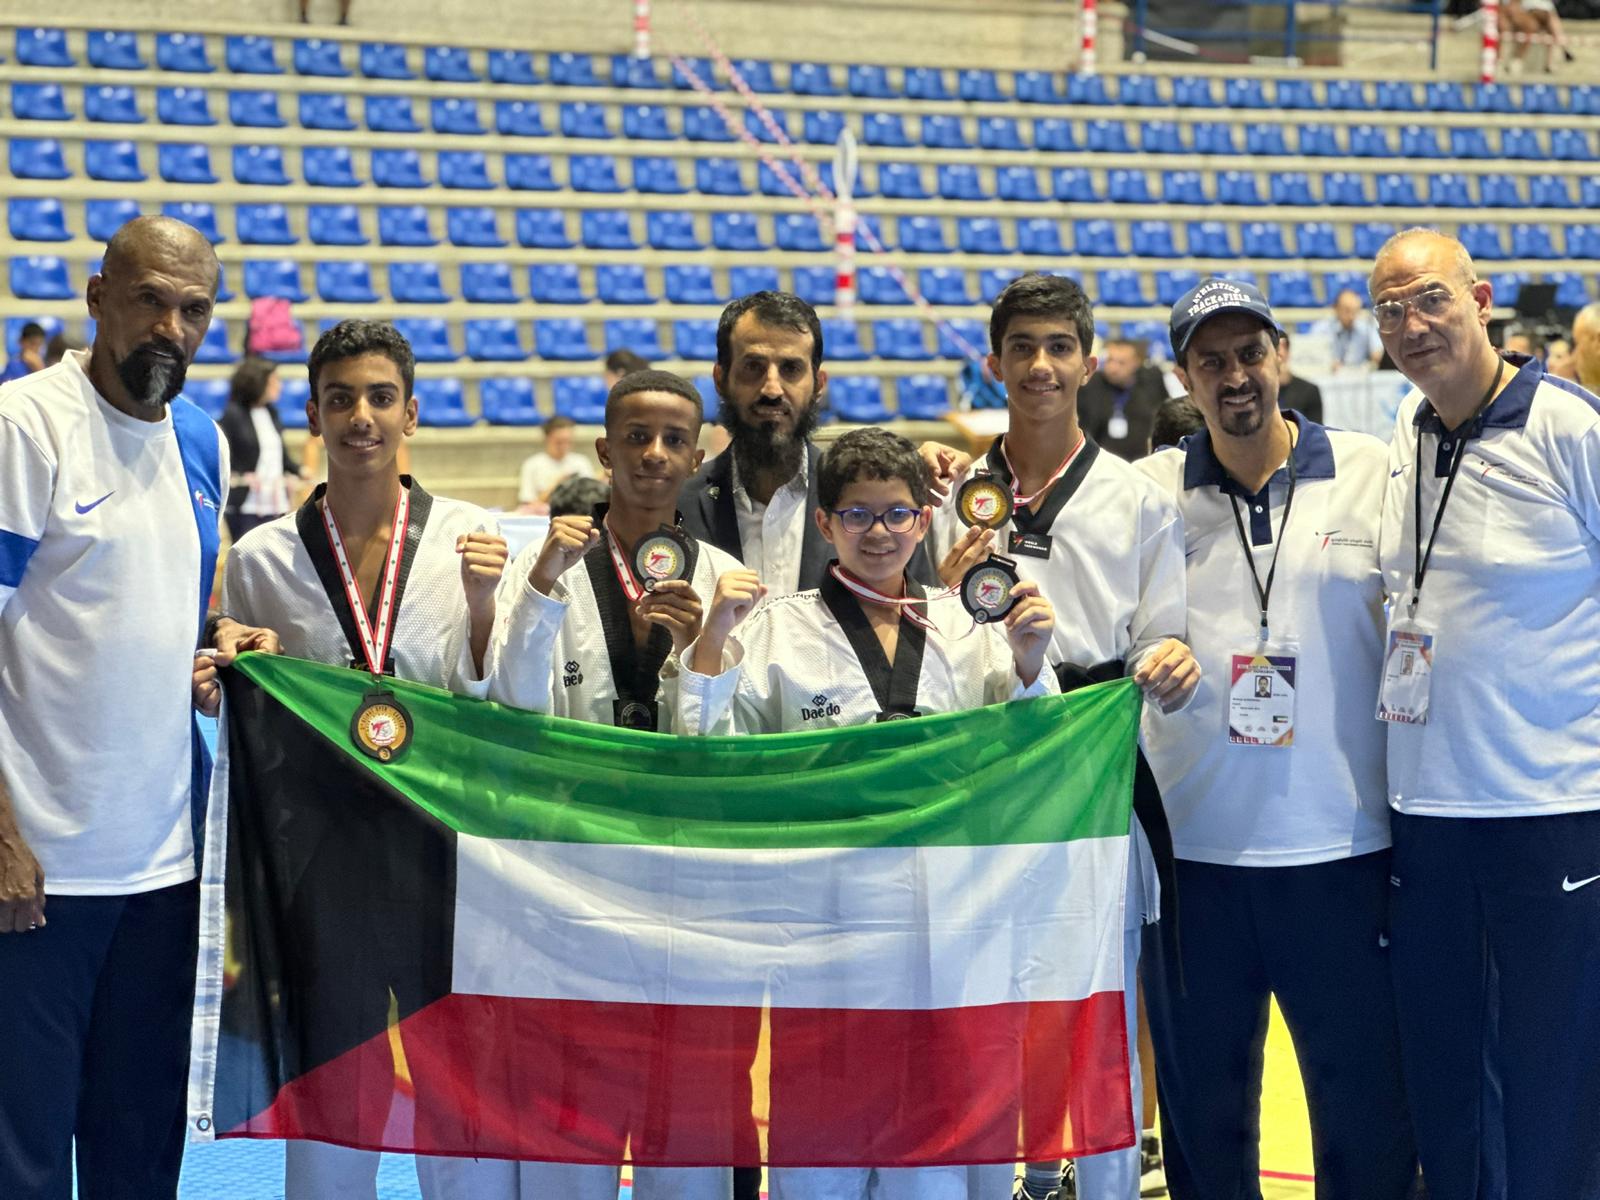 Kuwait bags 4 medals in Beirut open taekwondo competition